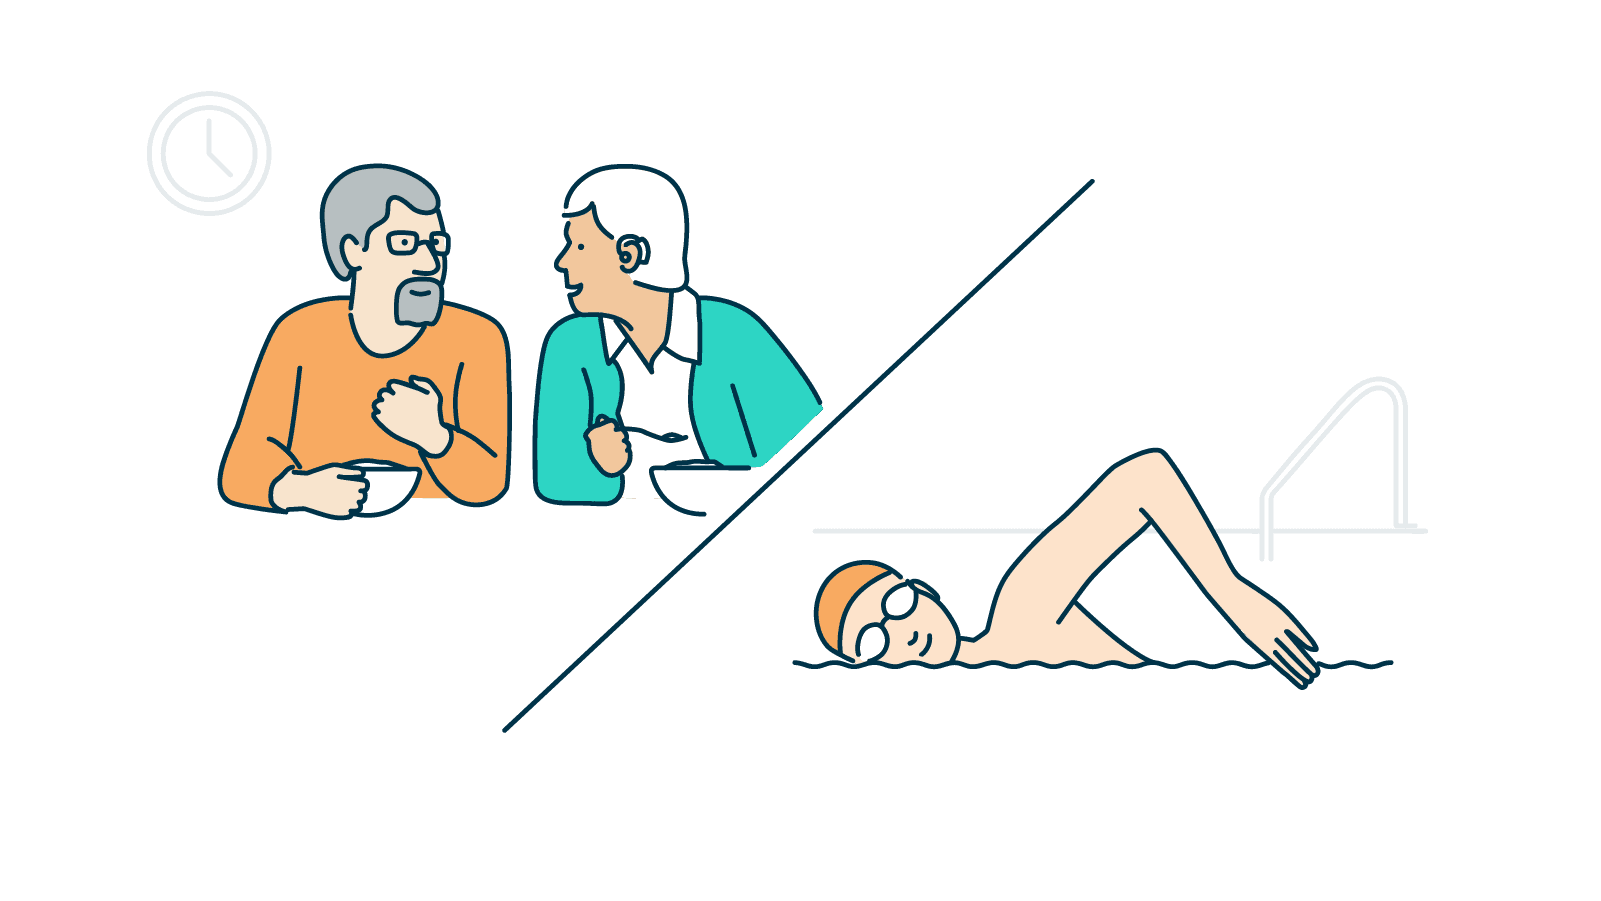 An illustration showing two people talking and eating and another of someone swimming